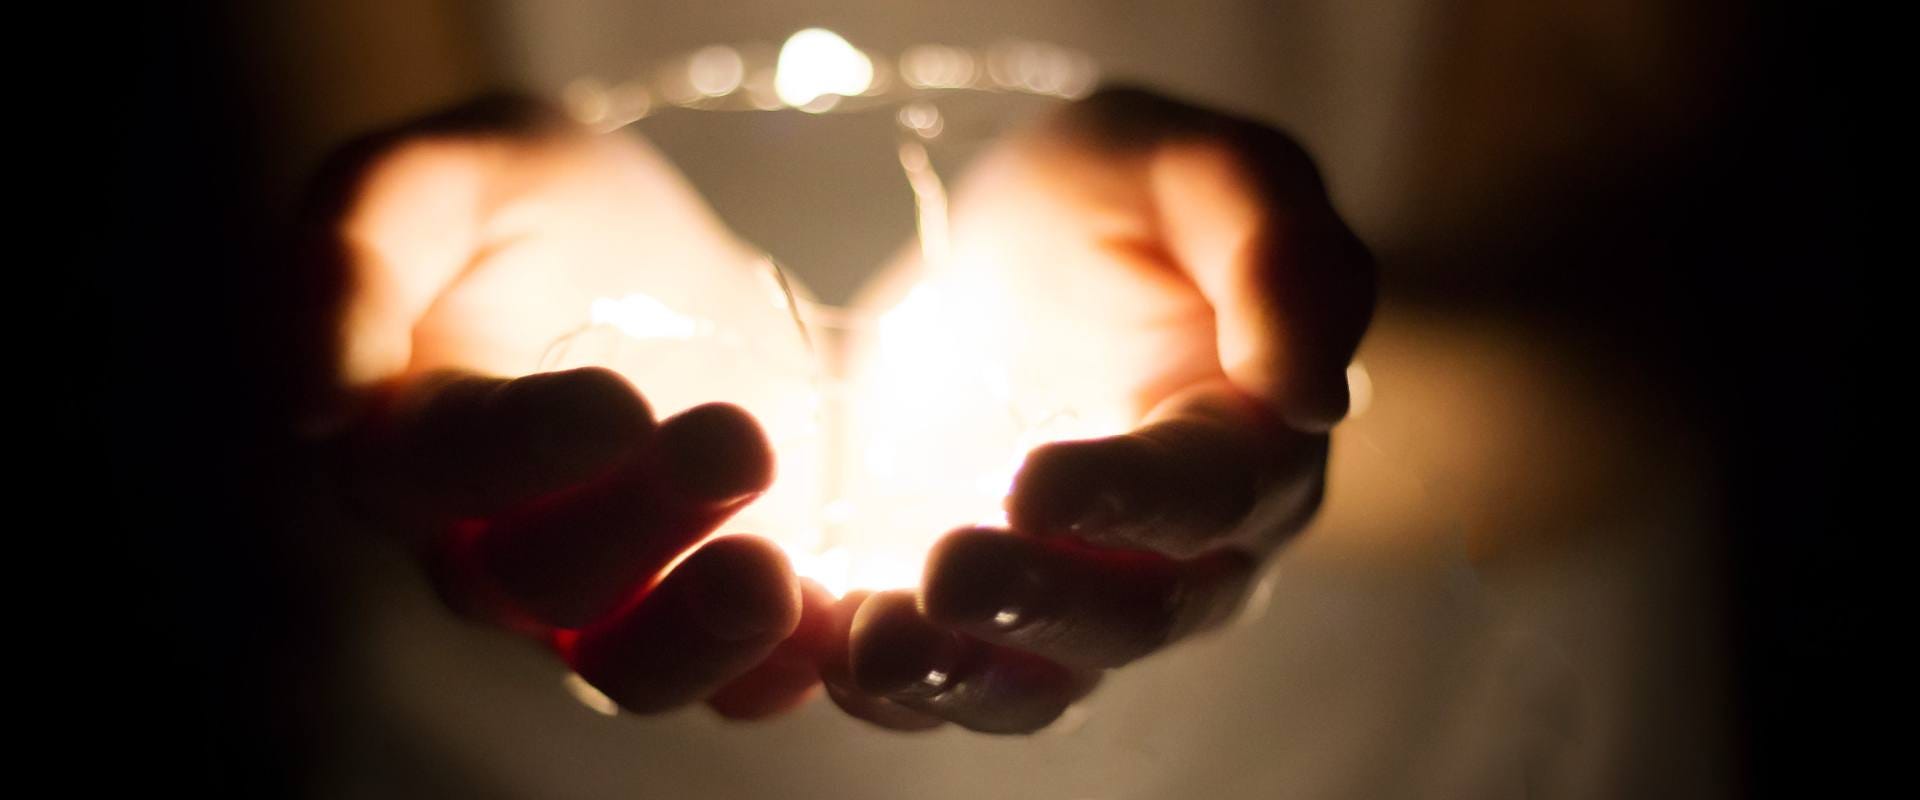 image of hands holding light in the darkness